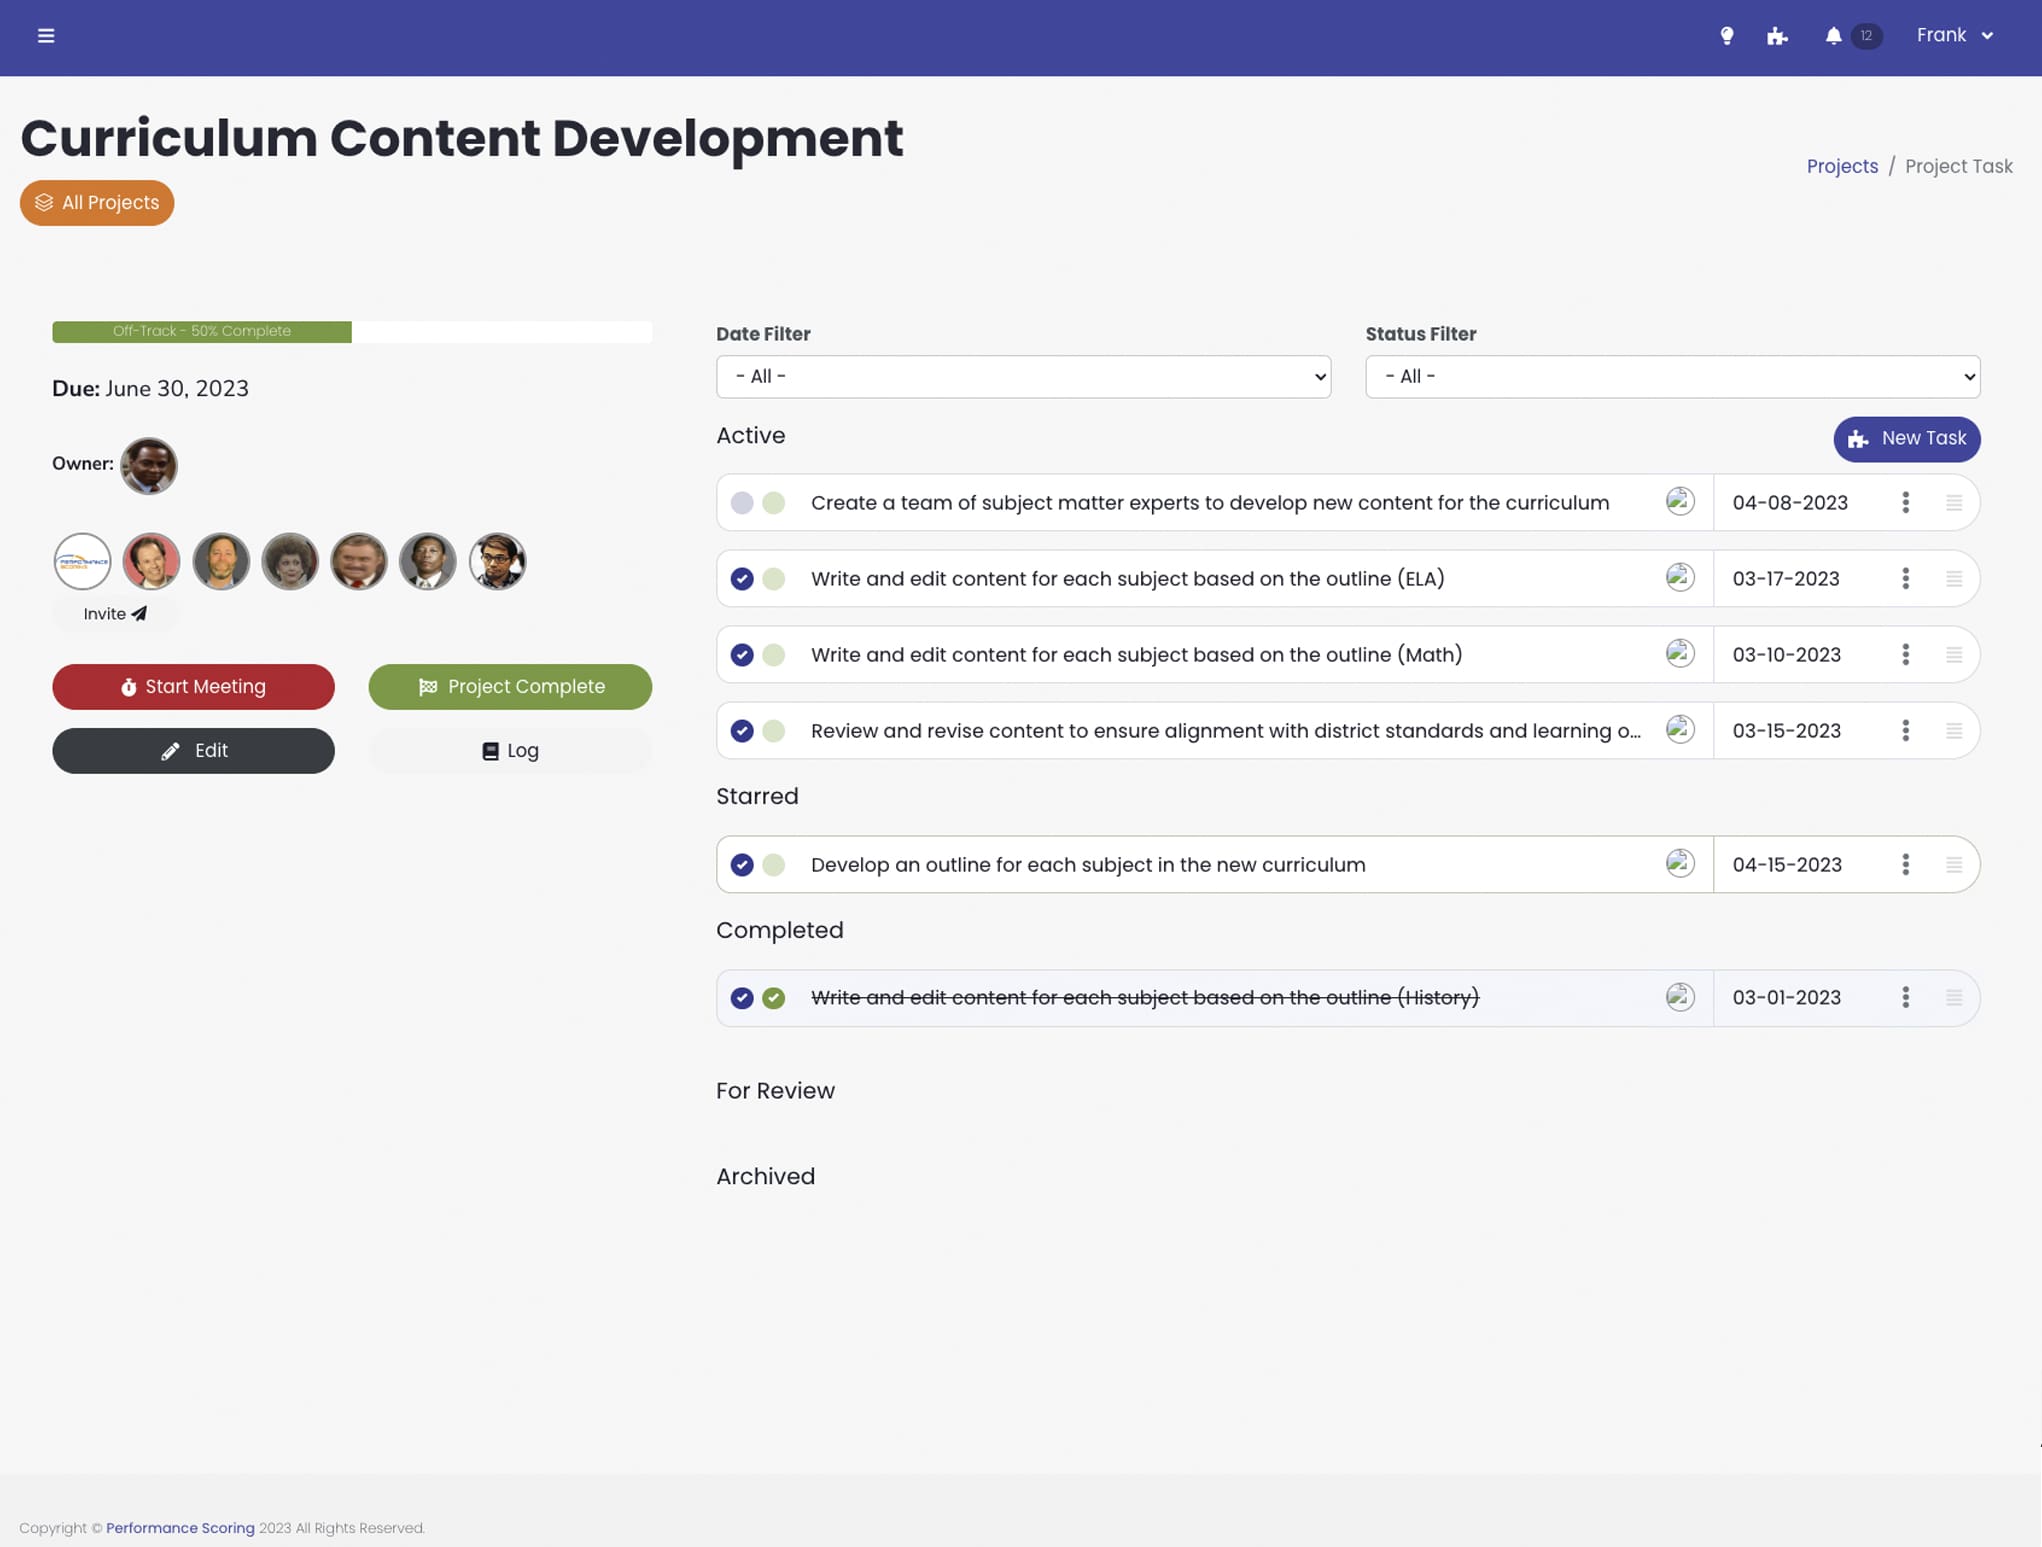 With LoopSpire you can create and manage project workflows, assign tasks, and track progress towards goals.